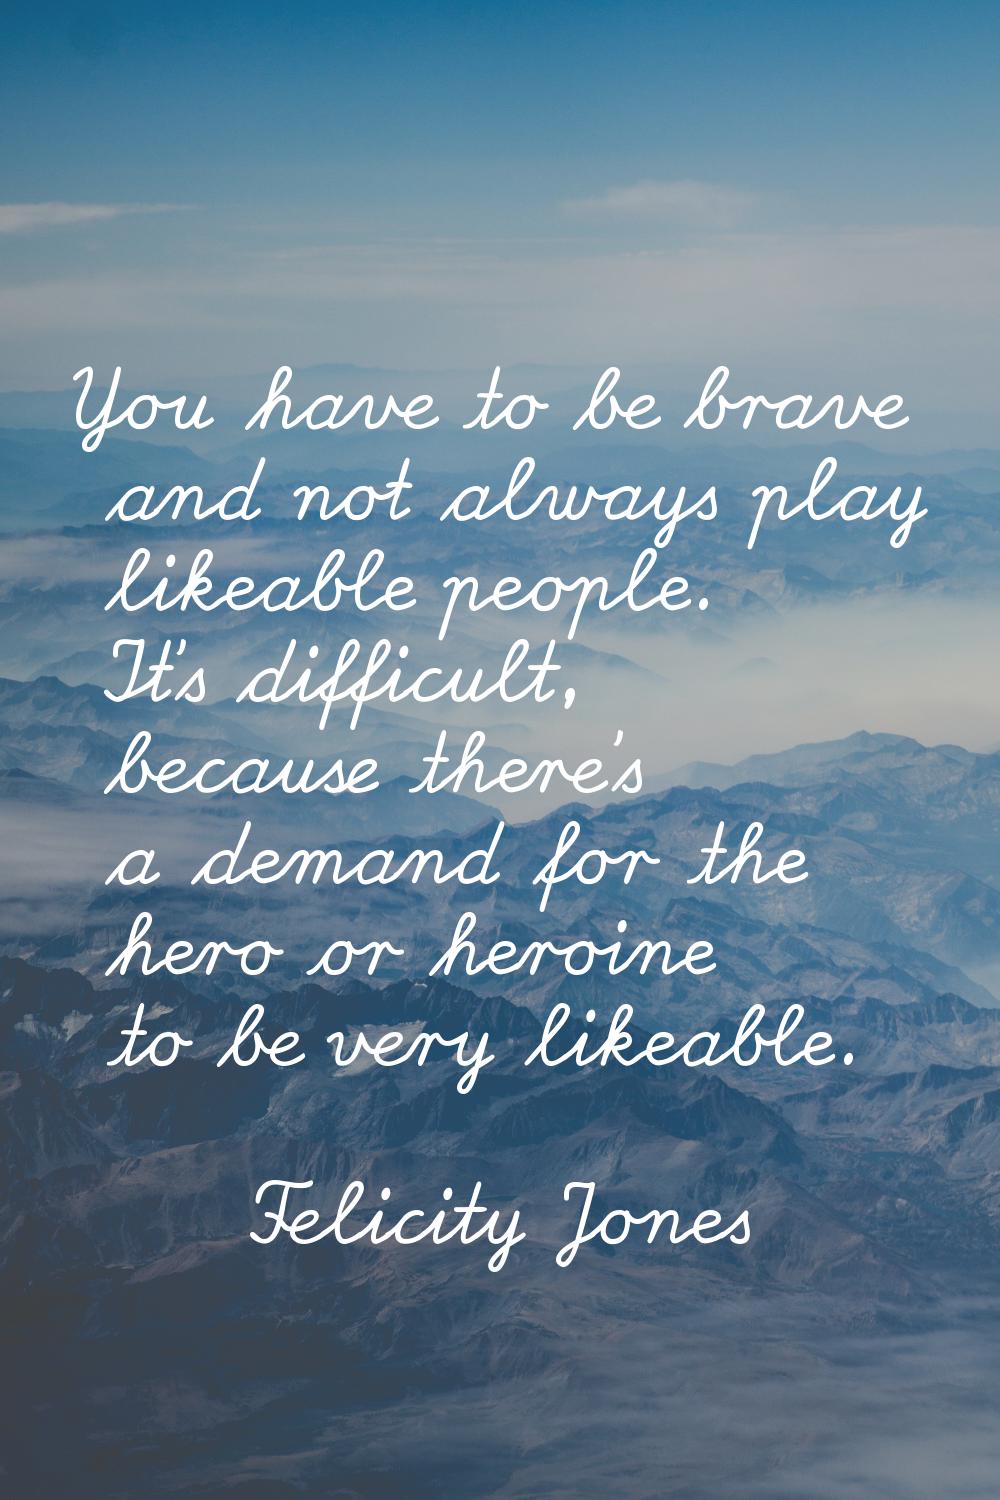 You have to be brave and not always play likeable people. It's difficult, because there's a demand 